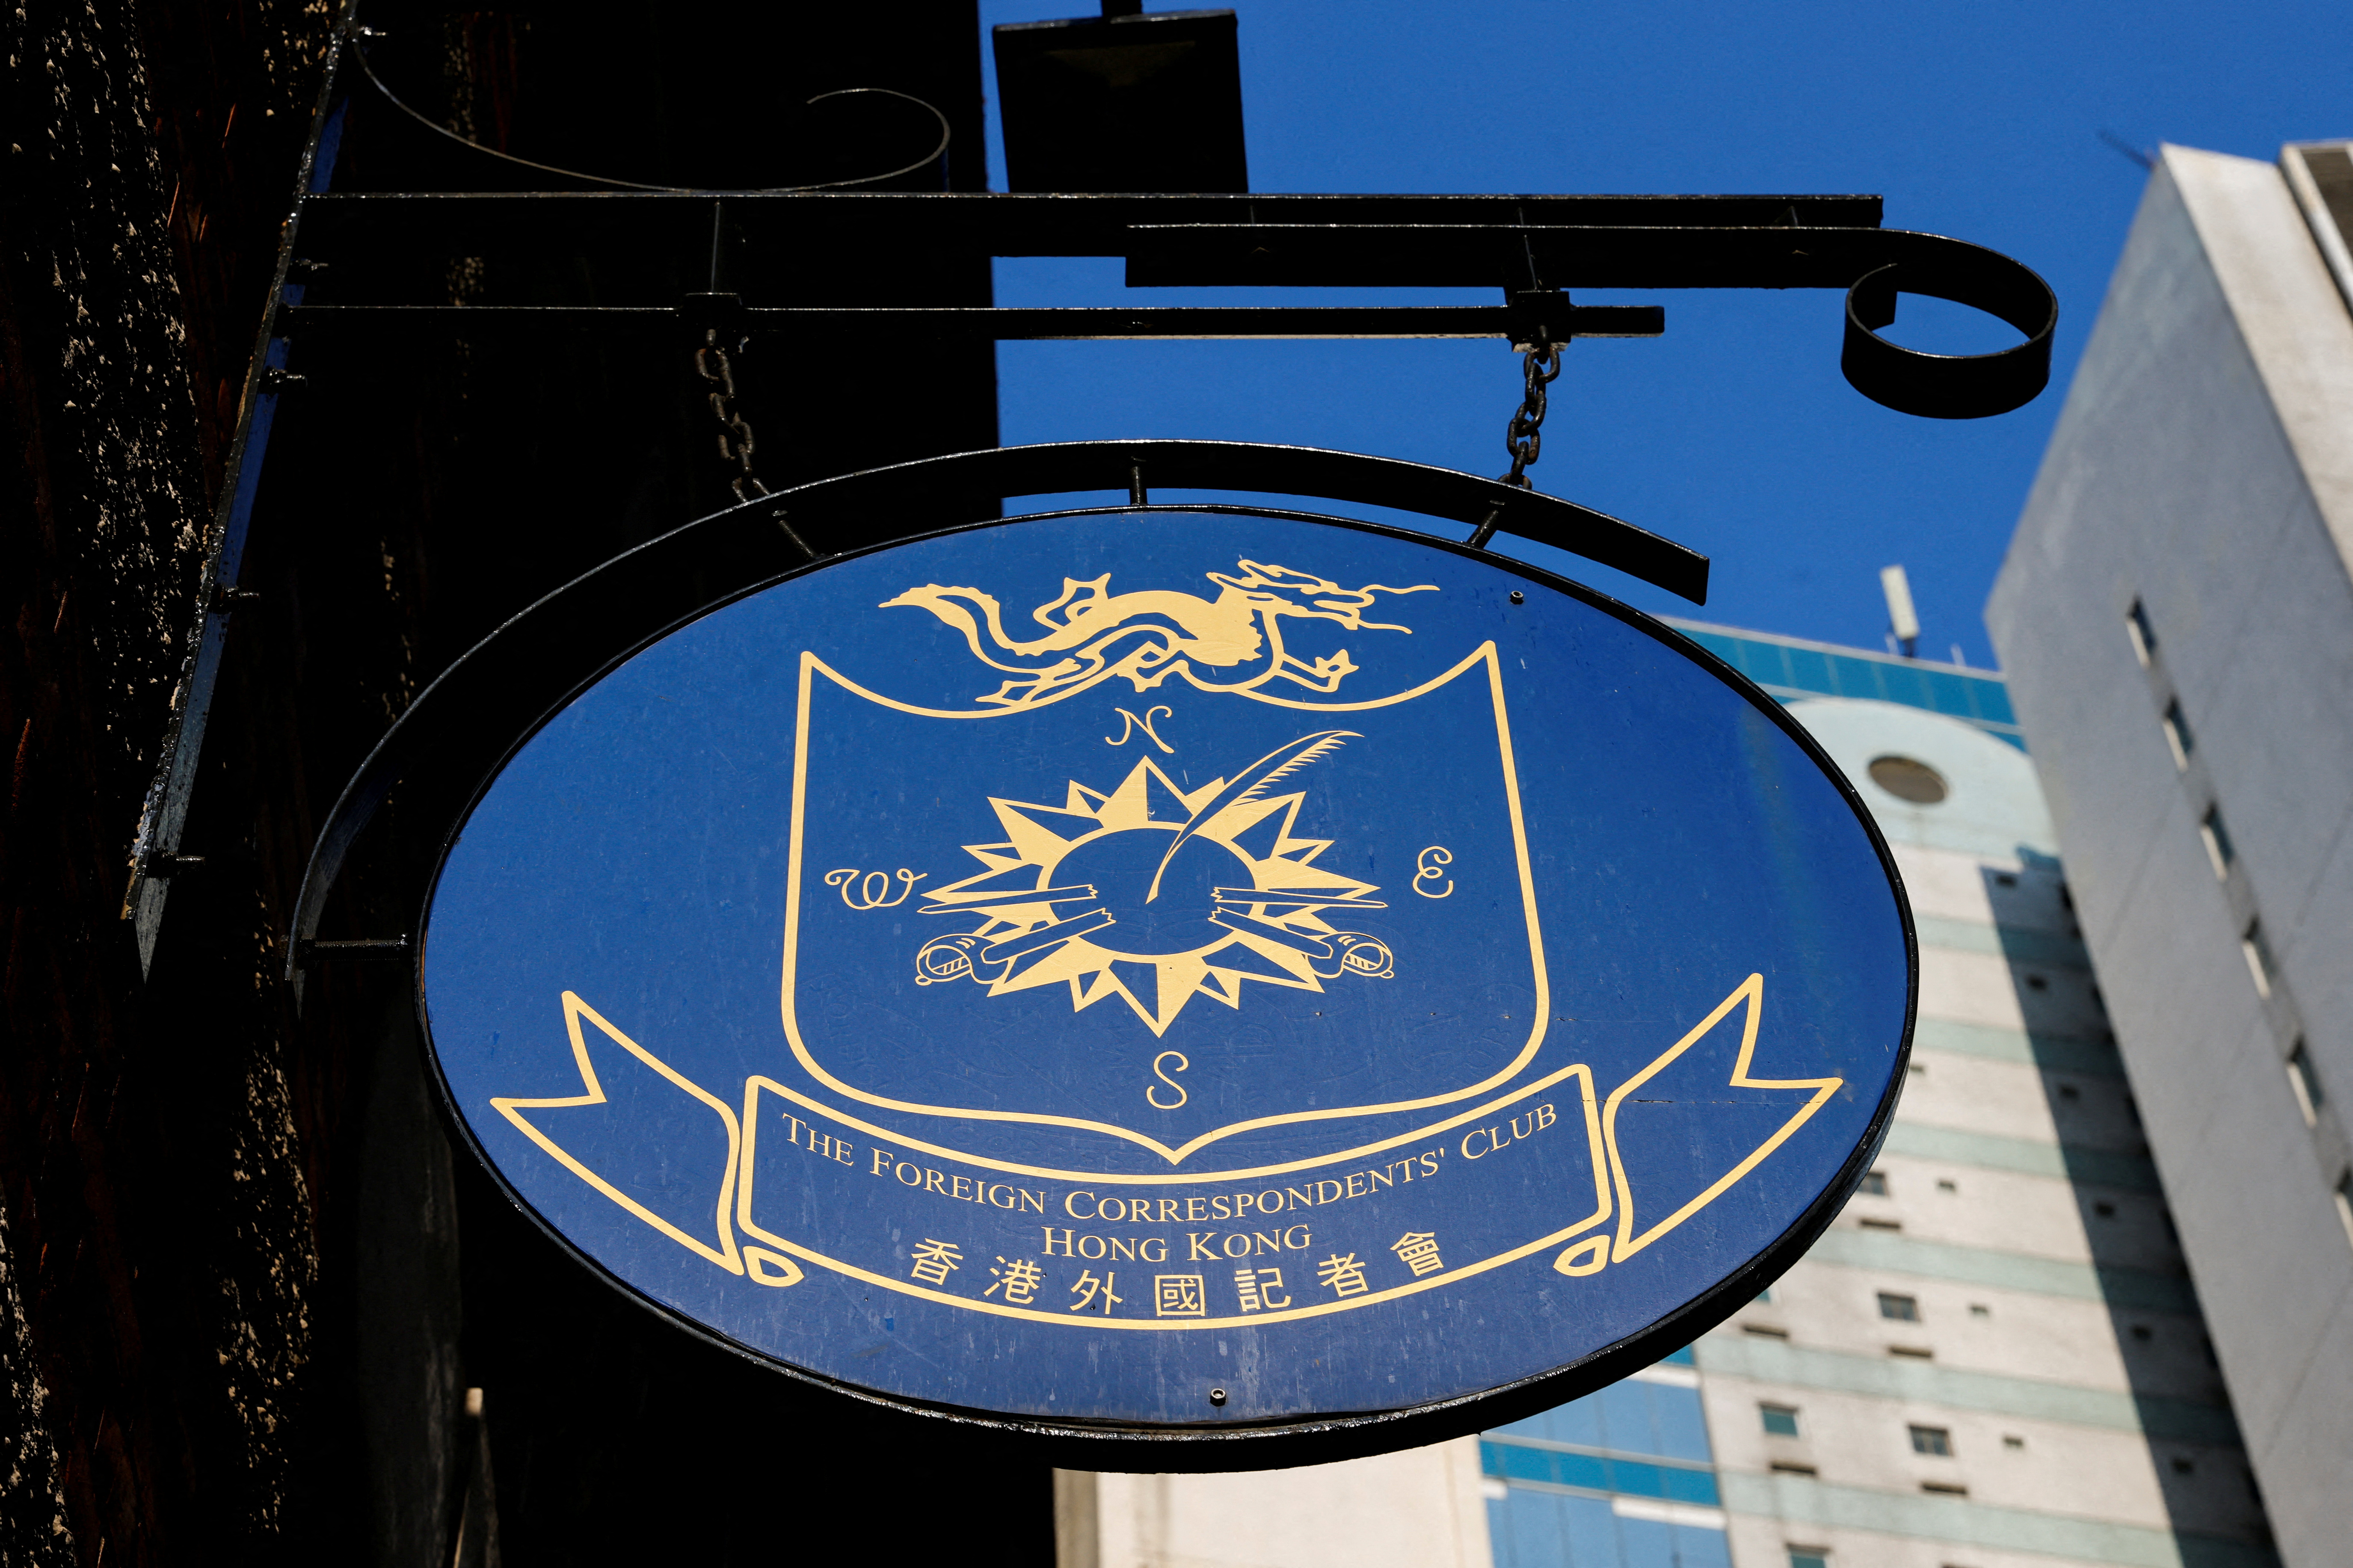 The logo of Foreign Correspondents' Club (FCC) is seen outside its building in Hong Kong, China January 11, 2022. REUTERS/Tyrone Siu - REFILE - CORRECTING YEAR